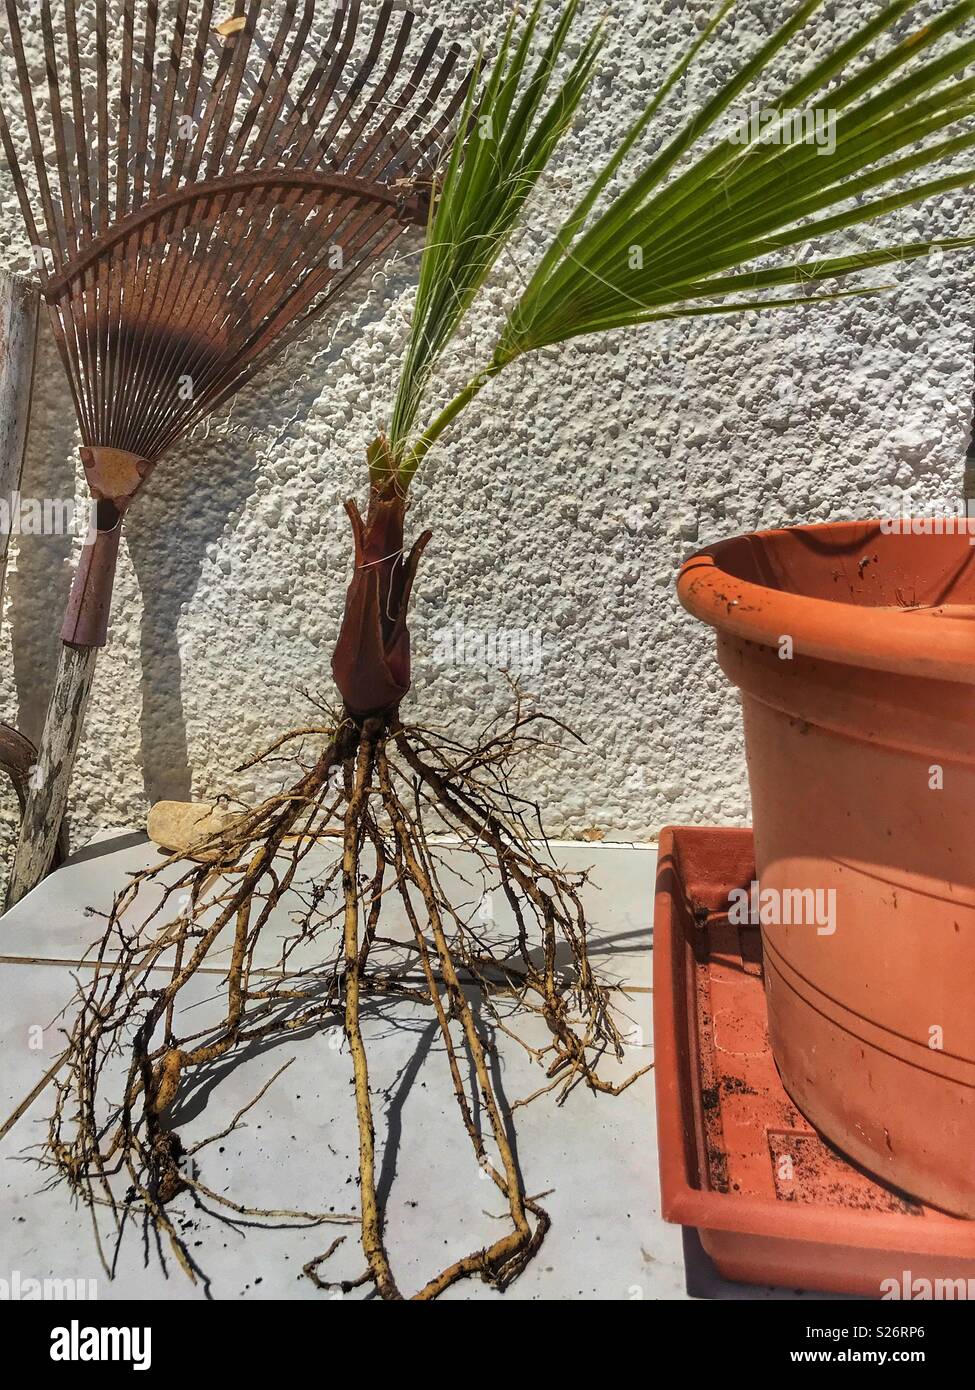 Gardening. A fan palm, showing its root system, ready to be planted in to a big flower pot after it seeded itself in an inappropriate place in the garden Stock Photo